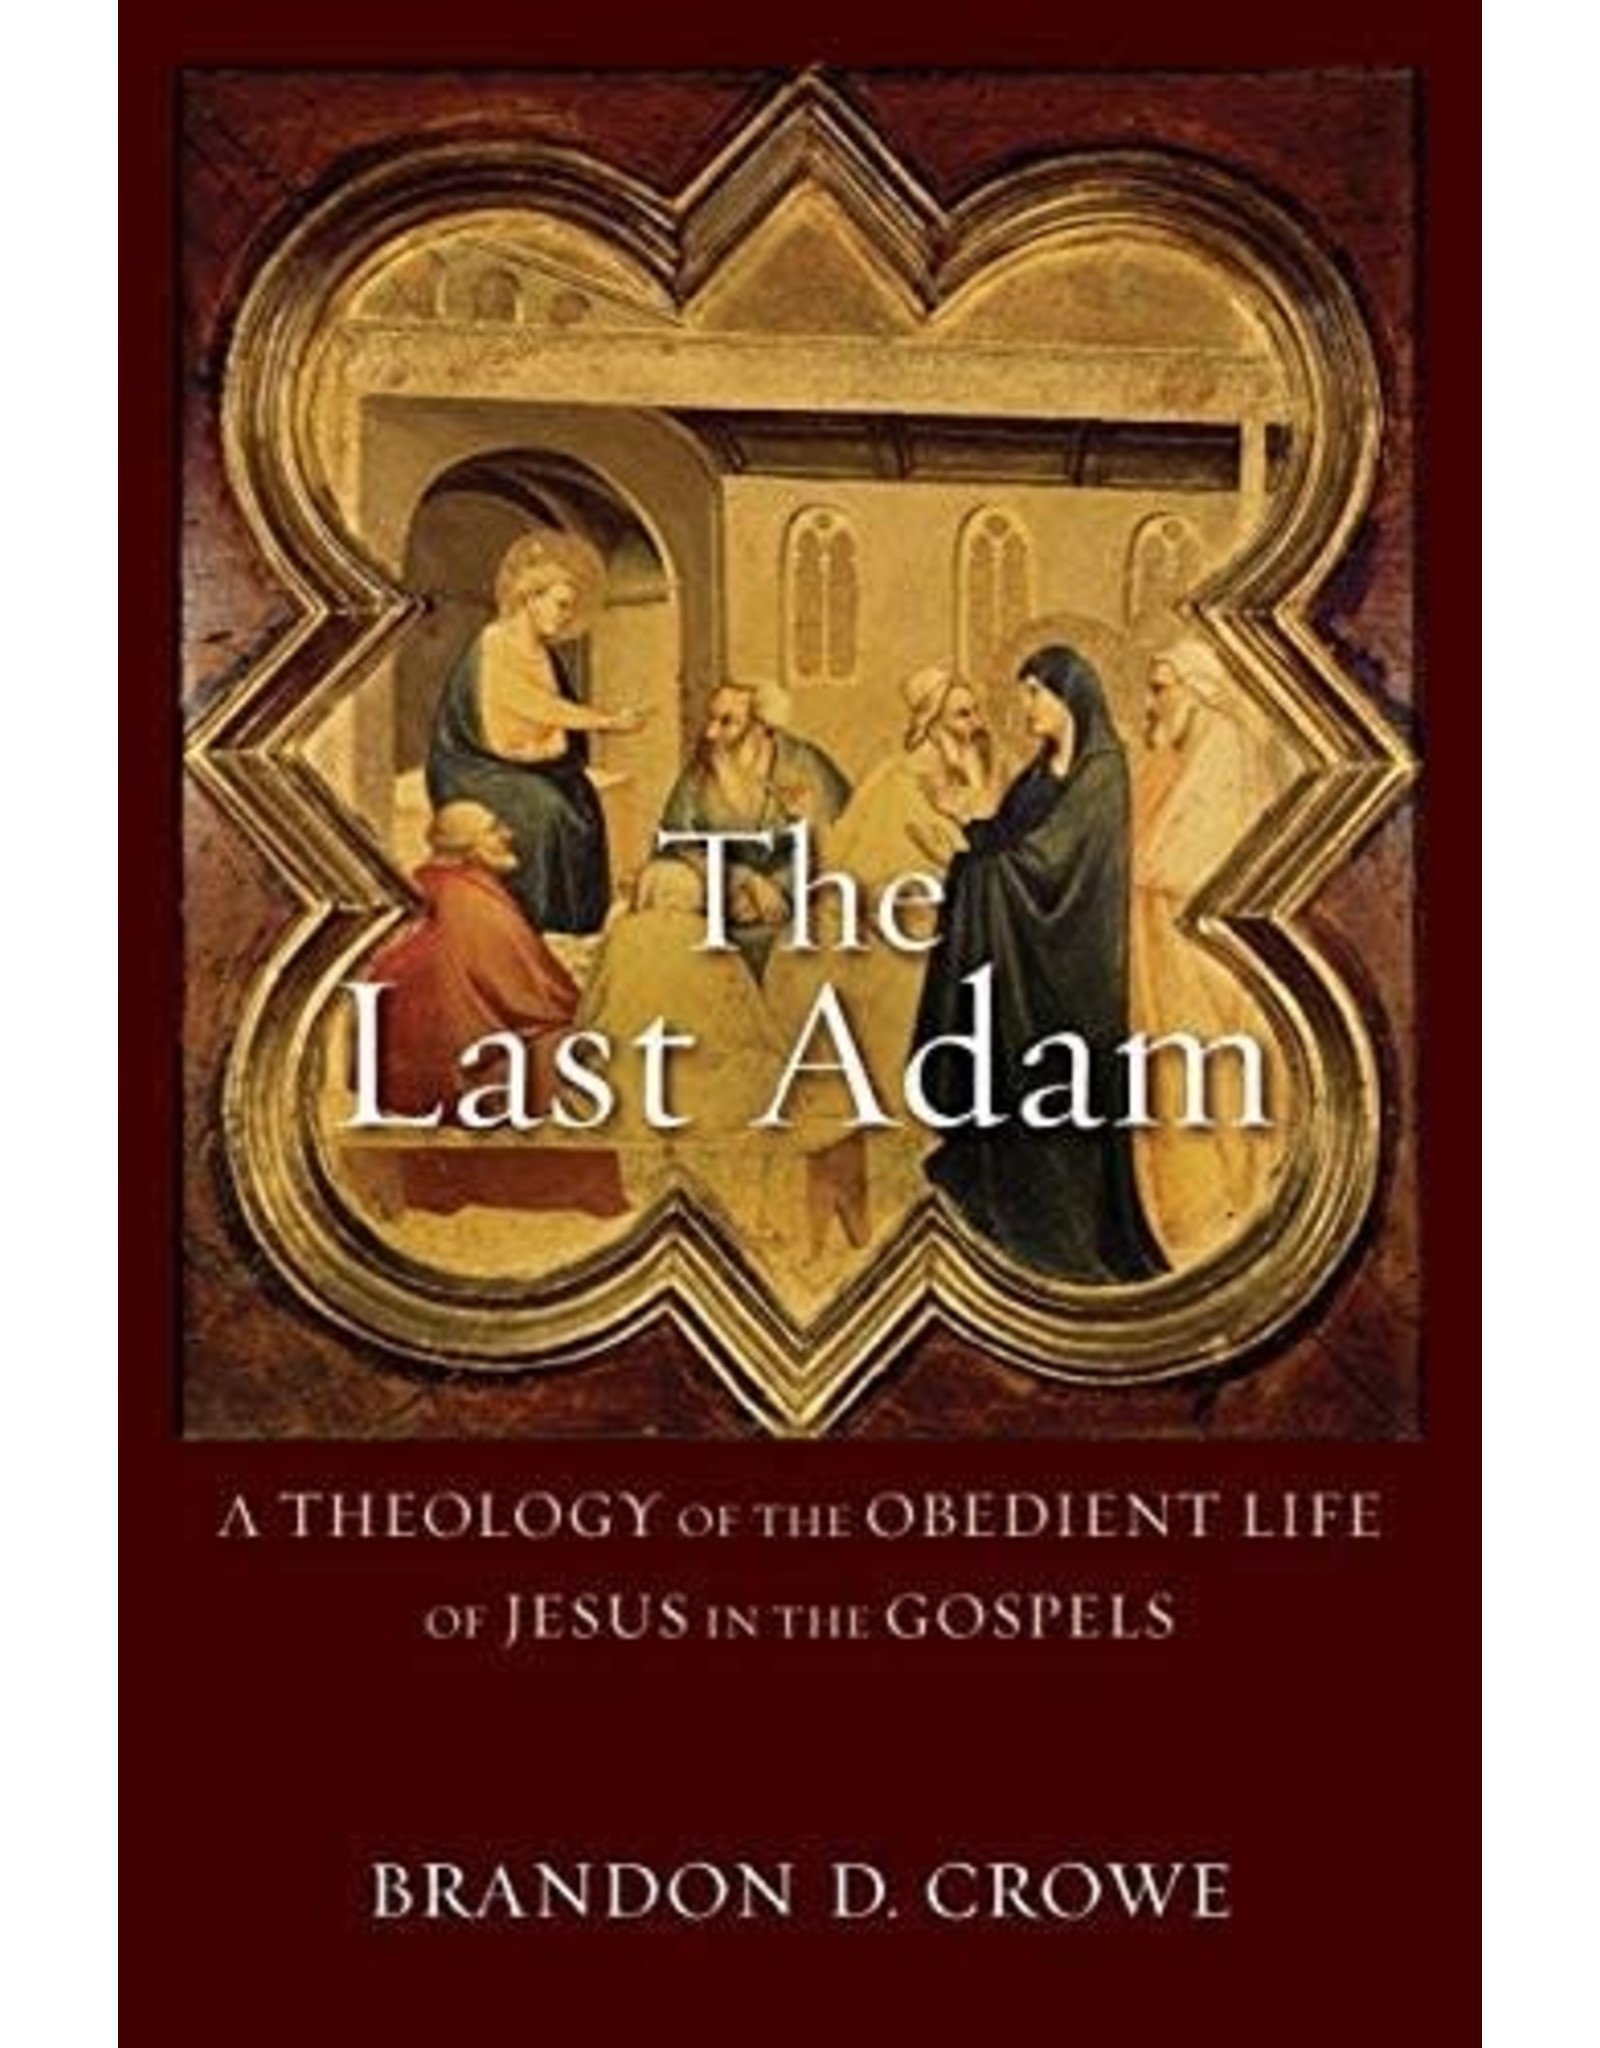 Baker Publishing Group / Bethany The Last Adam: A Theology of the Obedient Life of Jesus in the Gospels